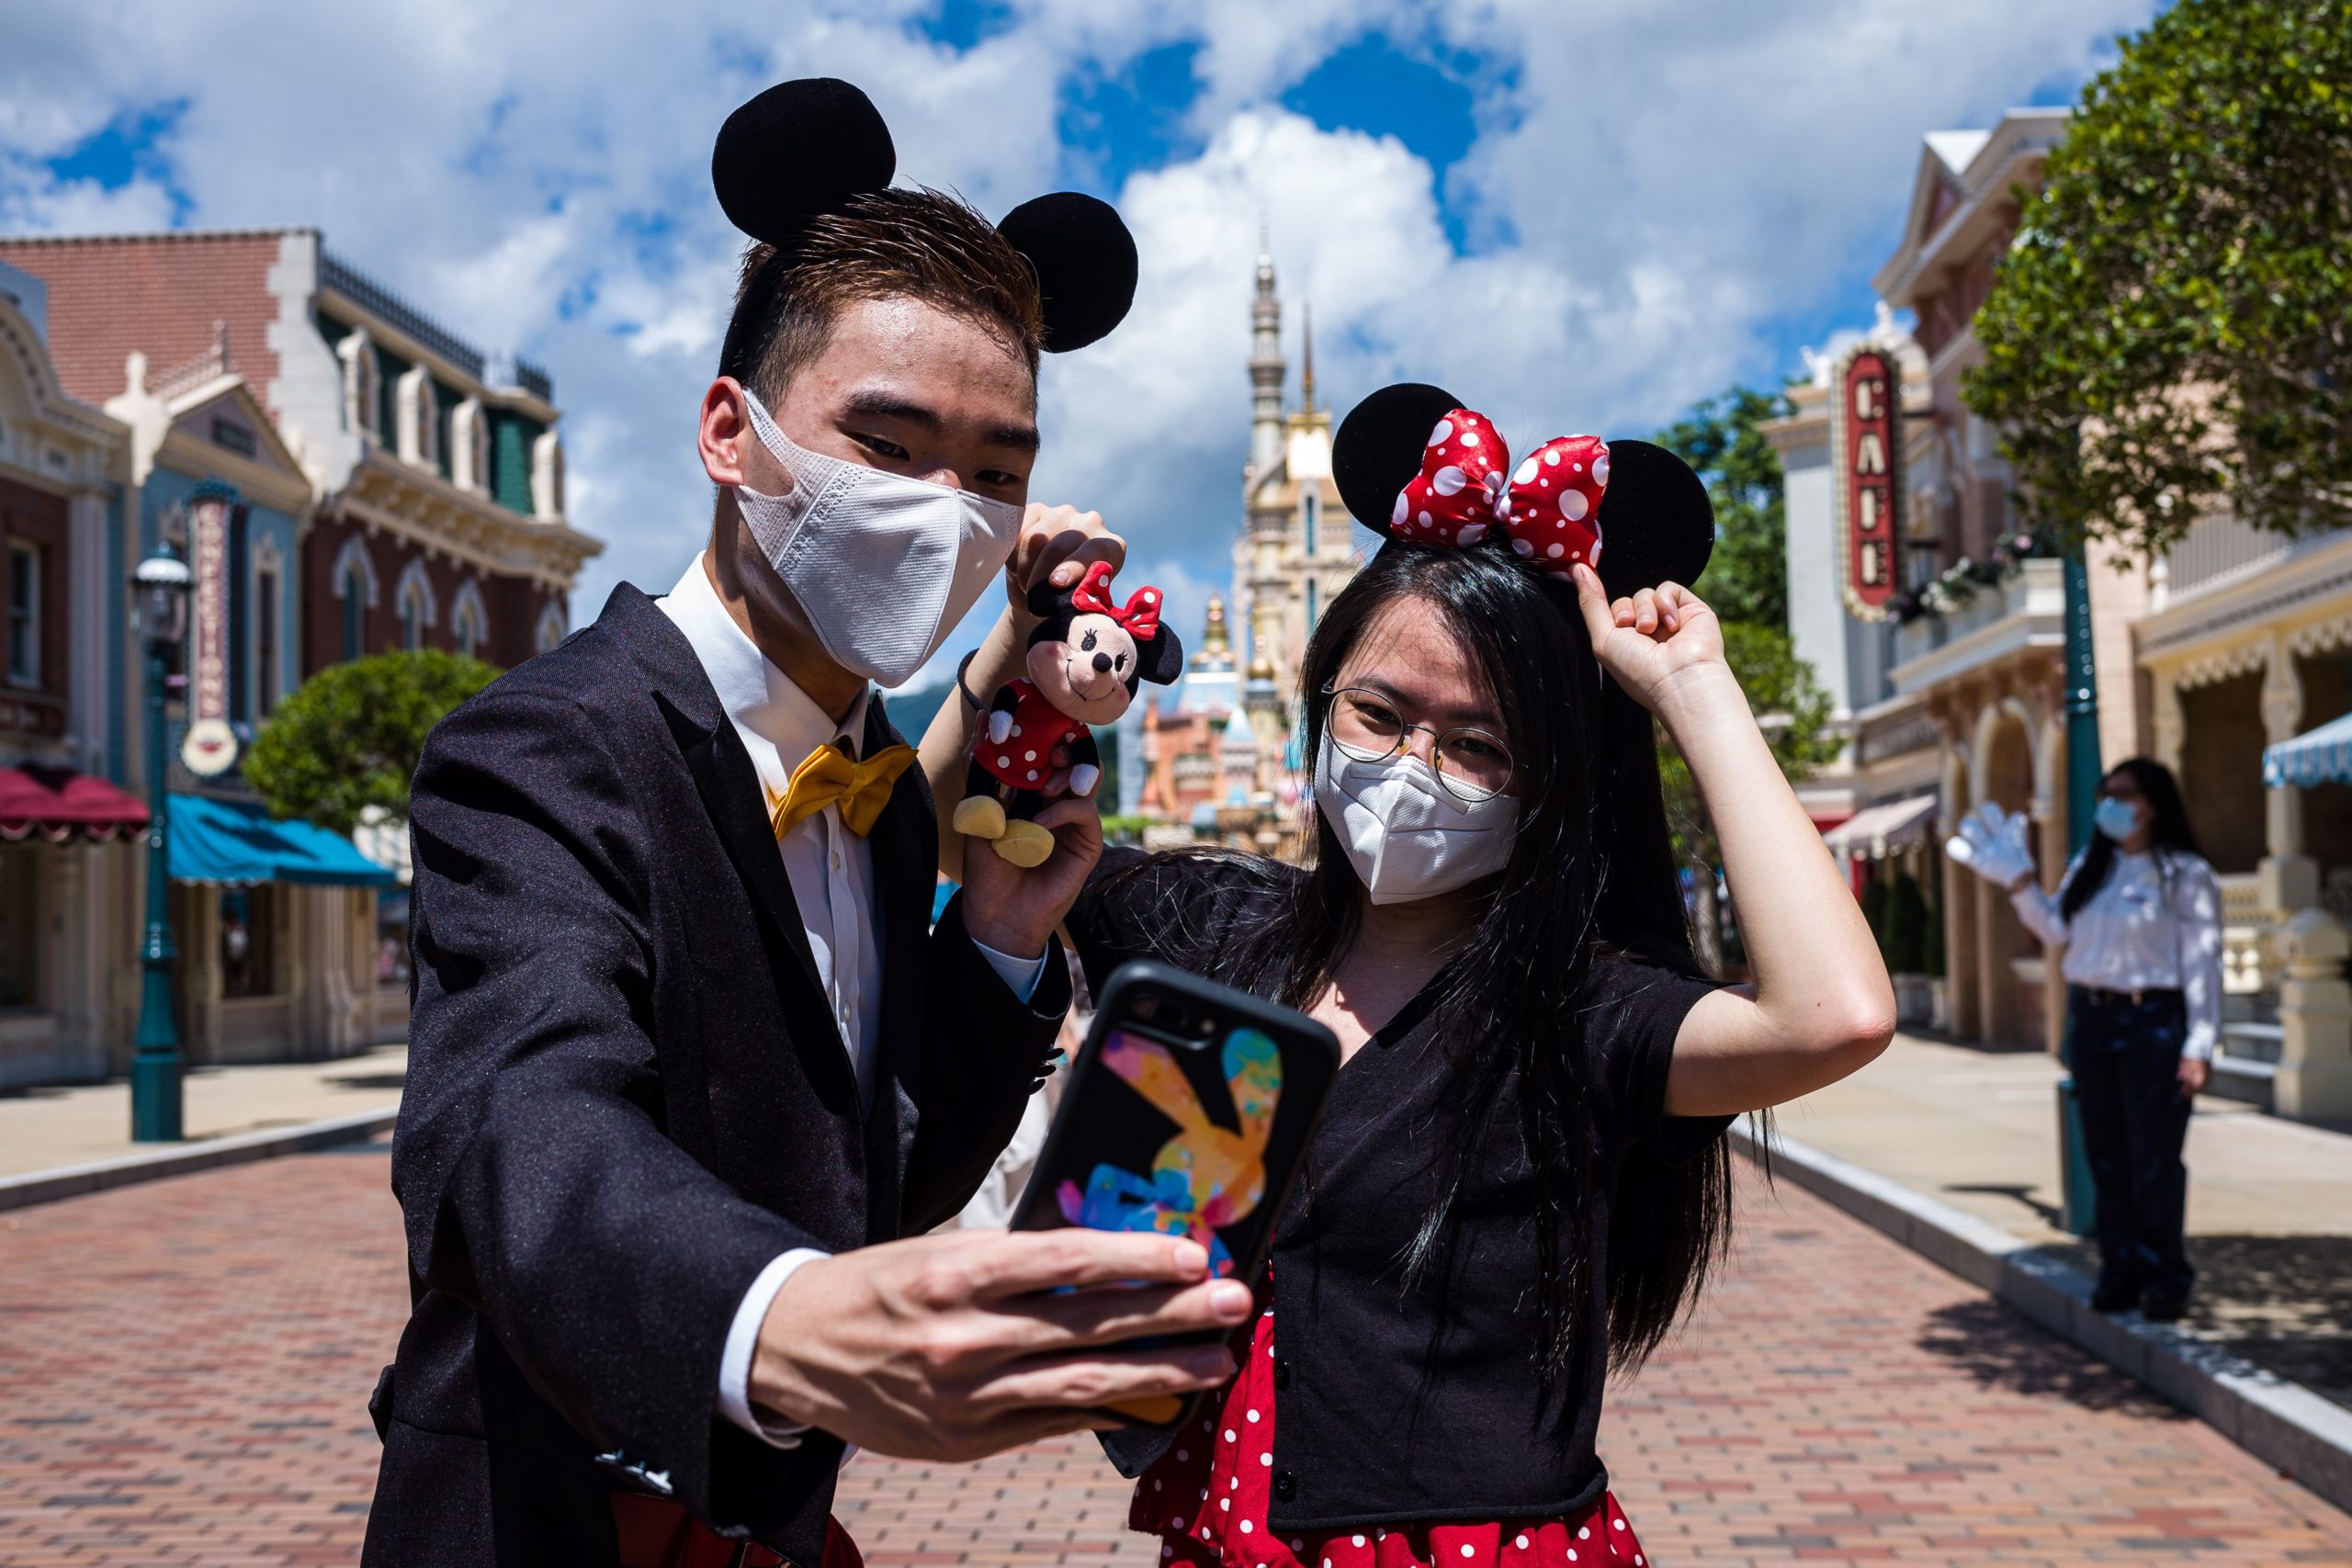 We went inside Hong Kong Disneyland’s reopening. Here is what we noticed